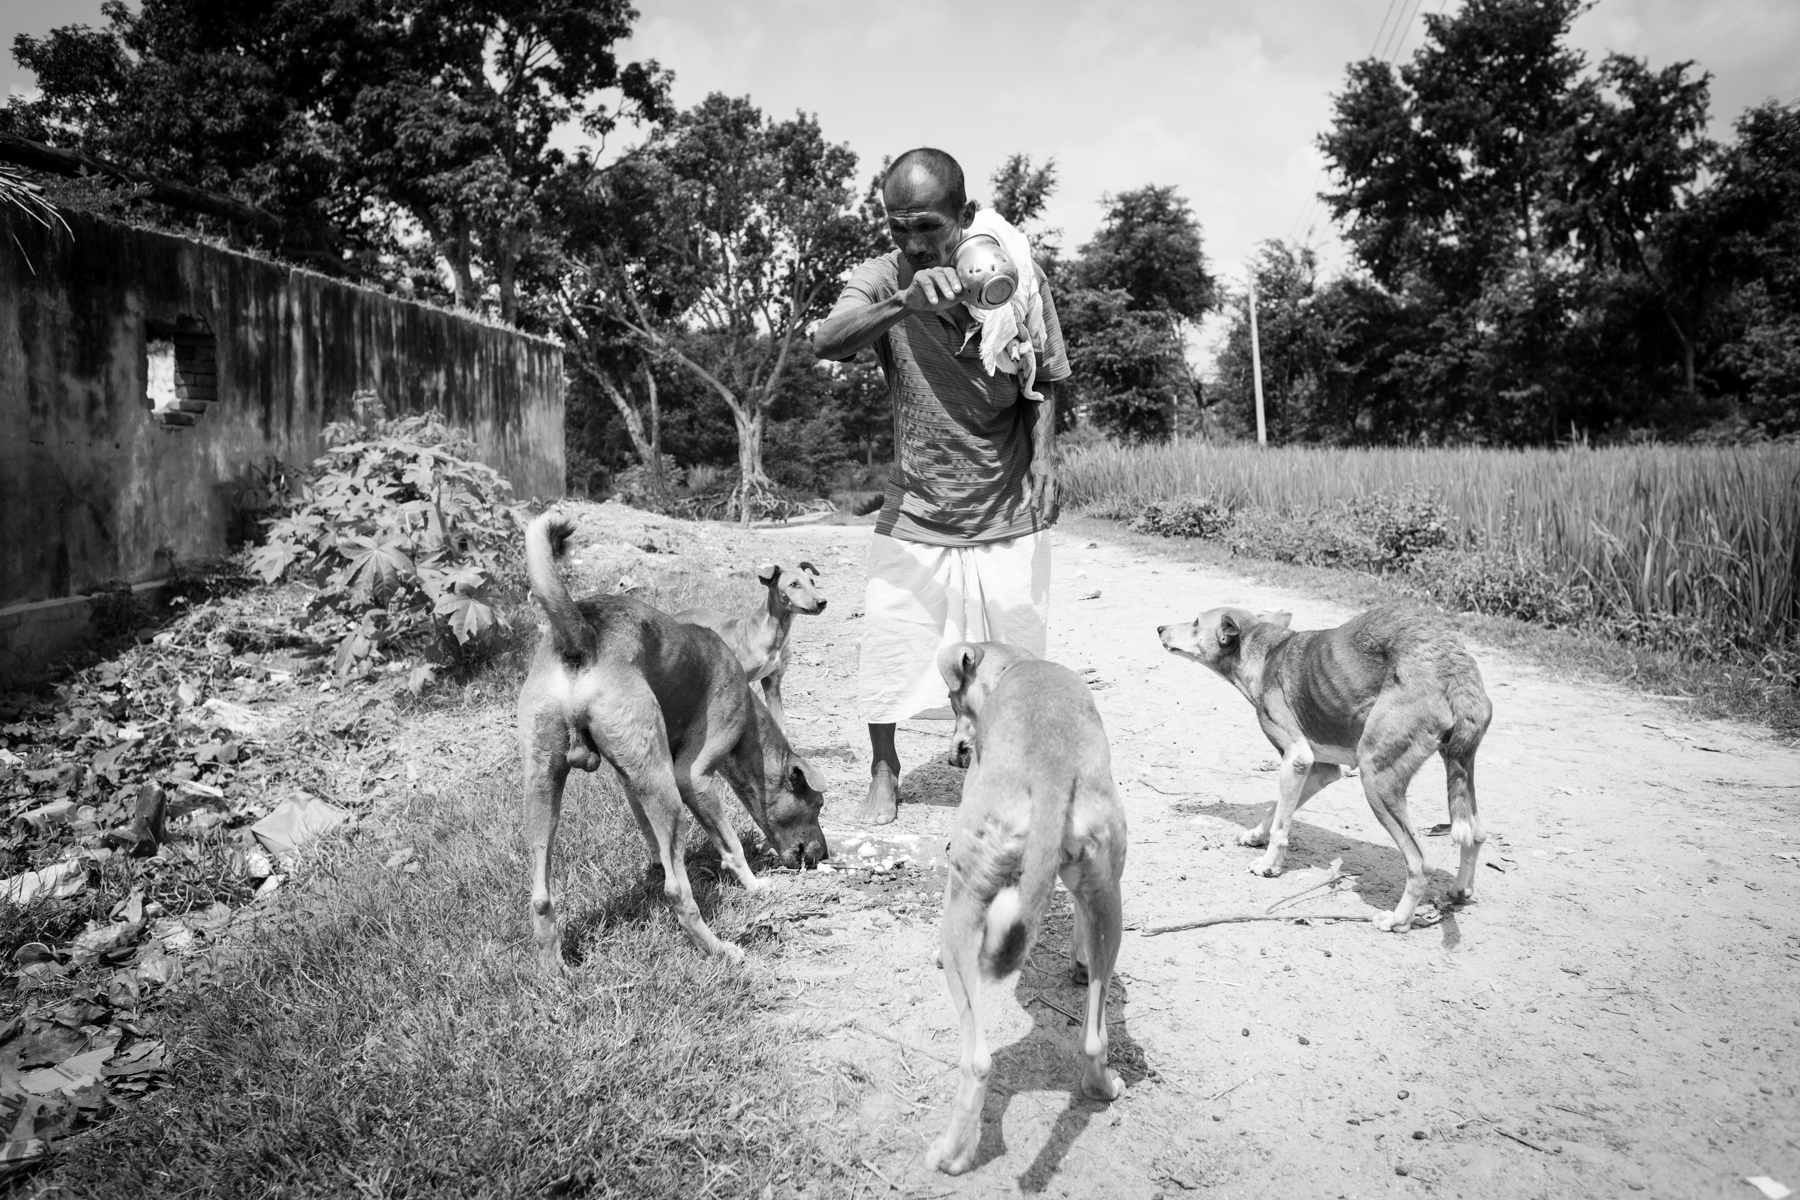 Bhagan Chaudhary chases away dogs who try to eat the food offered to his wife's soul. 24 August 2013, Supauli, Parsa, 
Nepal.